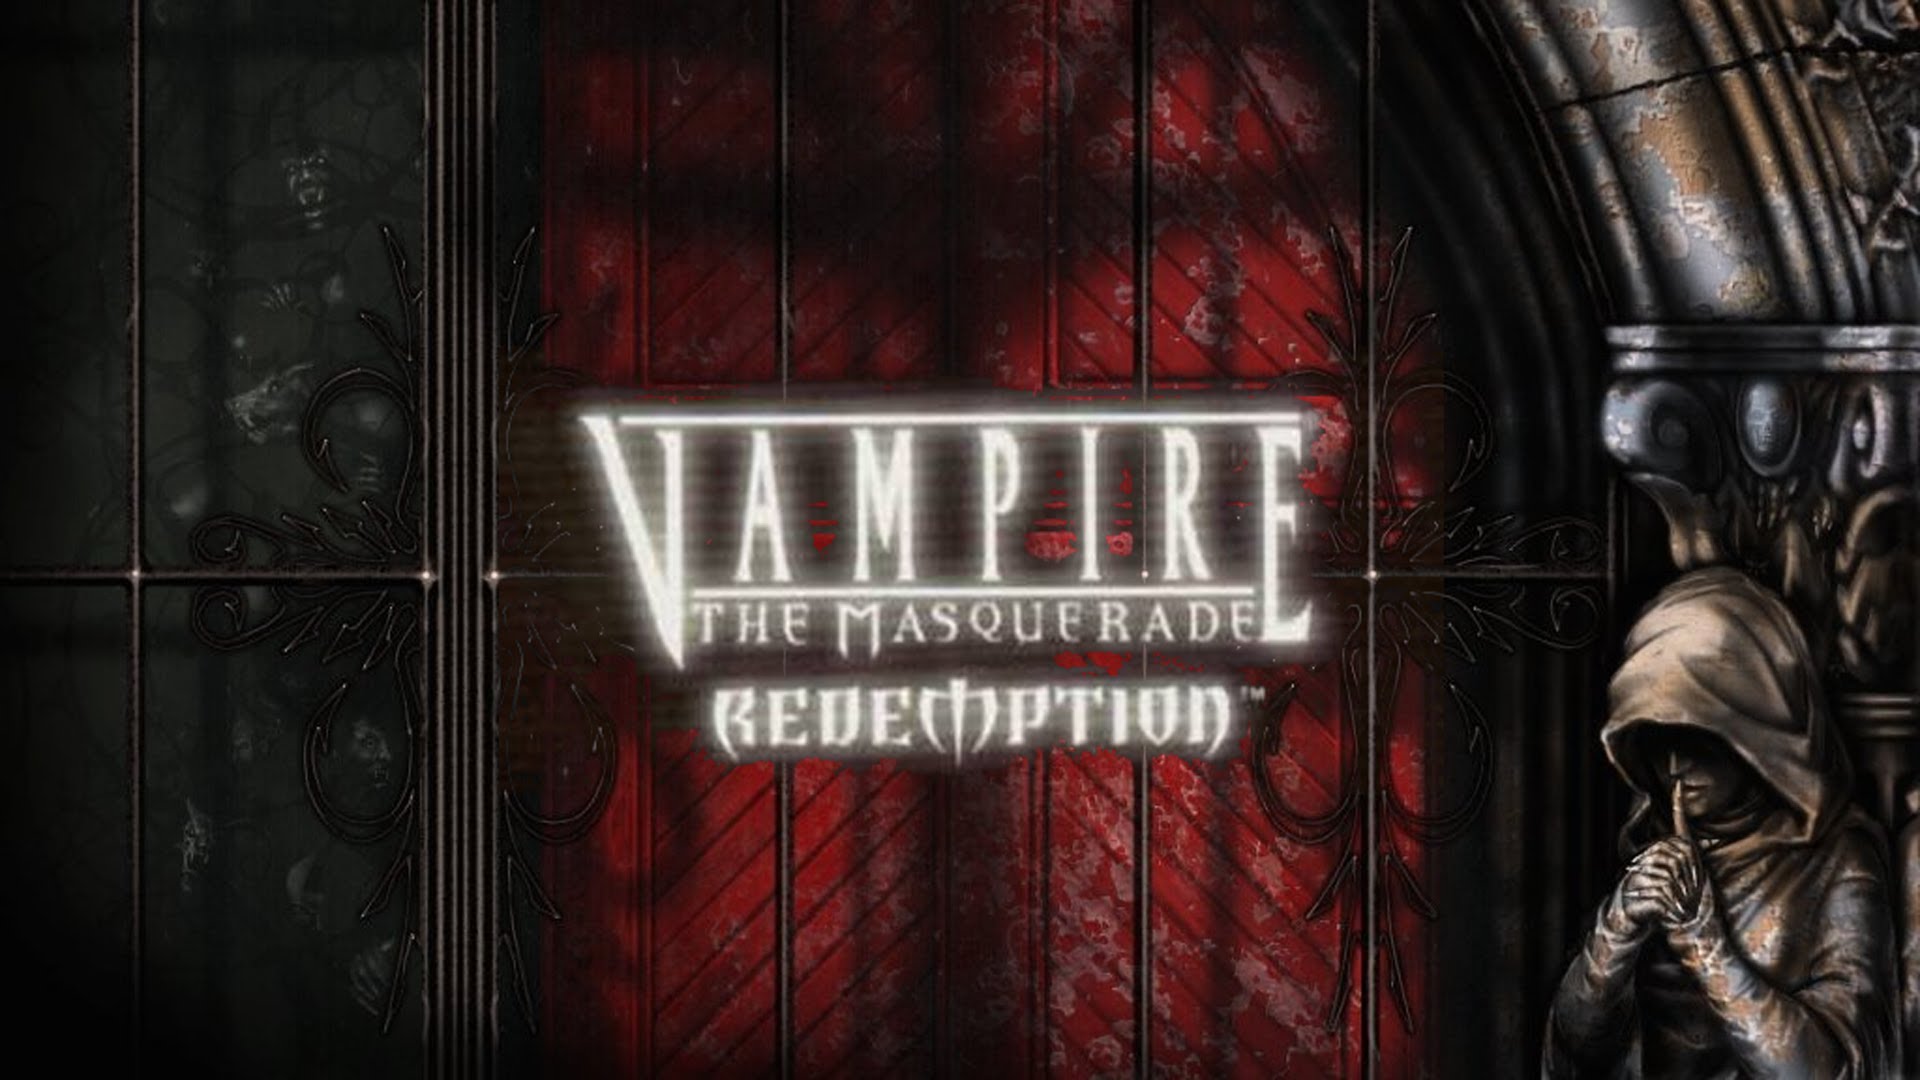 Vampire The Masquerade: Redemption - Enthusiacs